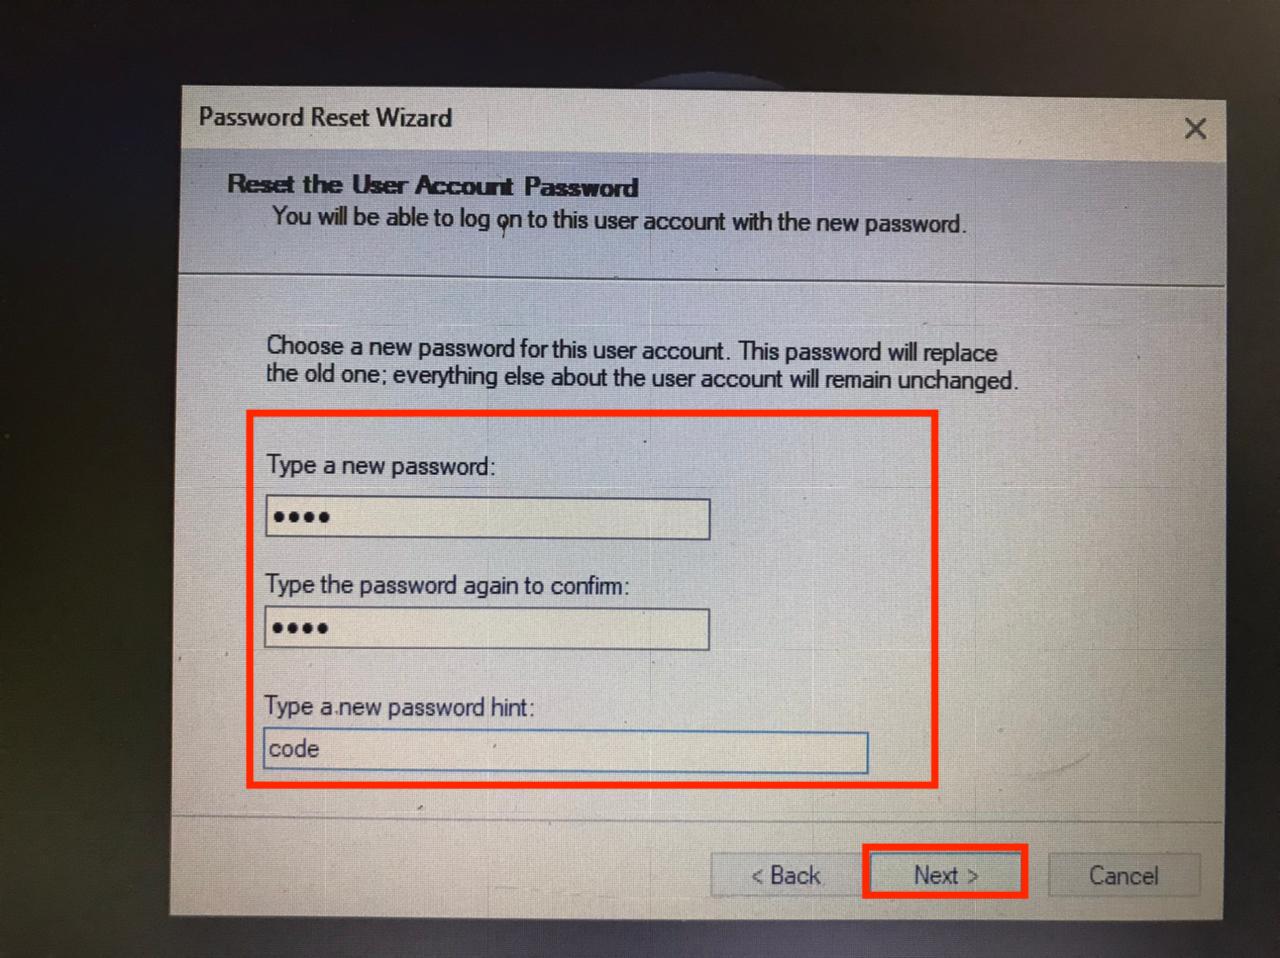 input your new password, confirm it and type in the password hint